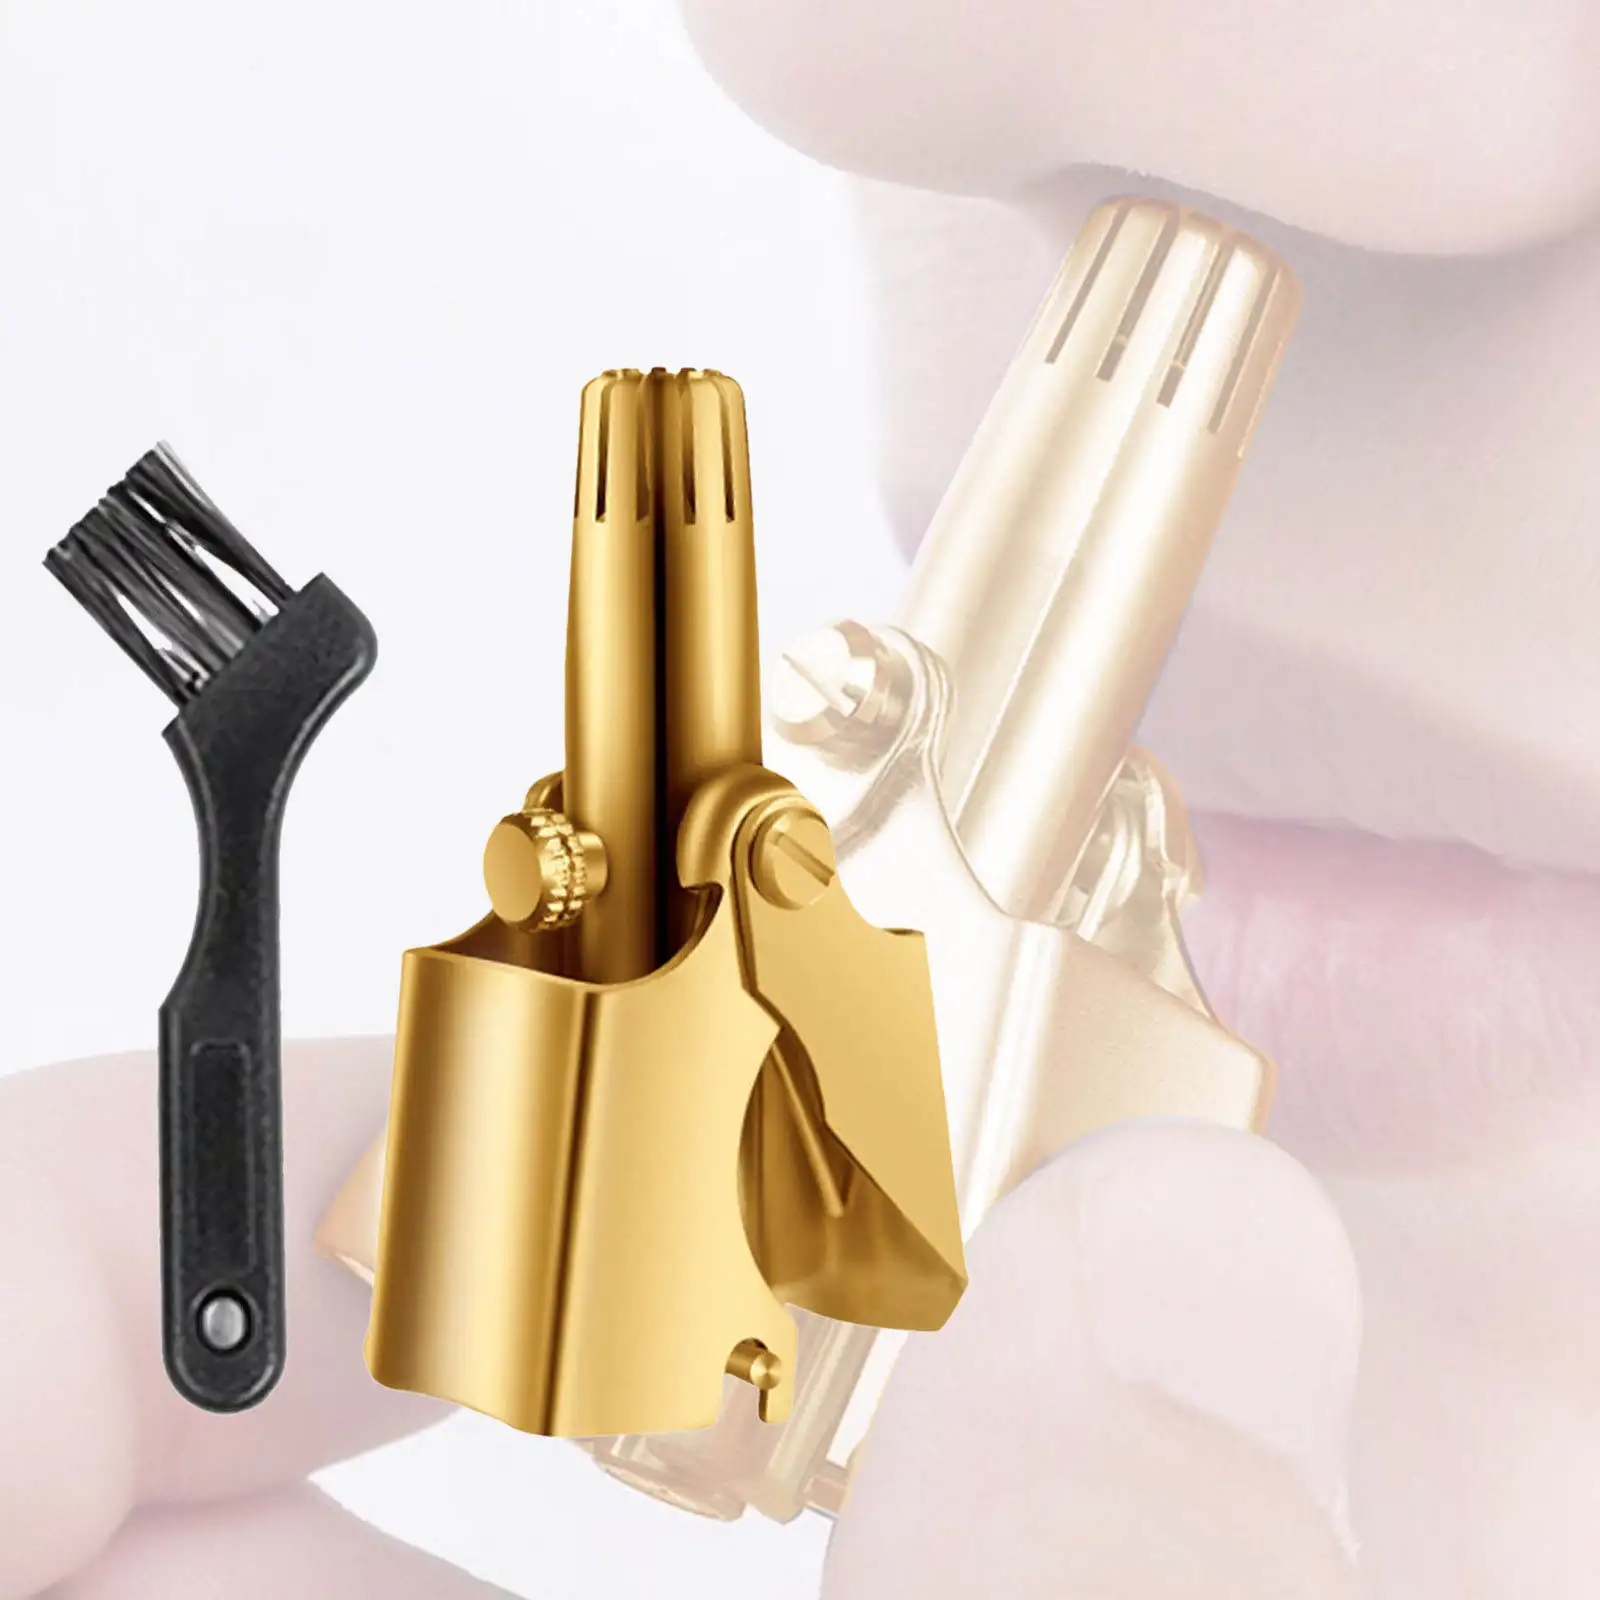 Nose Hair Trimmers with Brush Washable Ear Nose Trimmer Manual Device Stainless Steel Clipper Shaving Machine Removal Cleaner